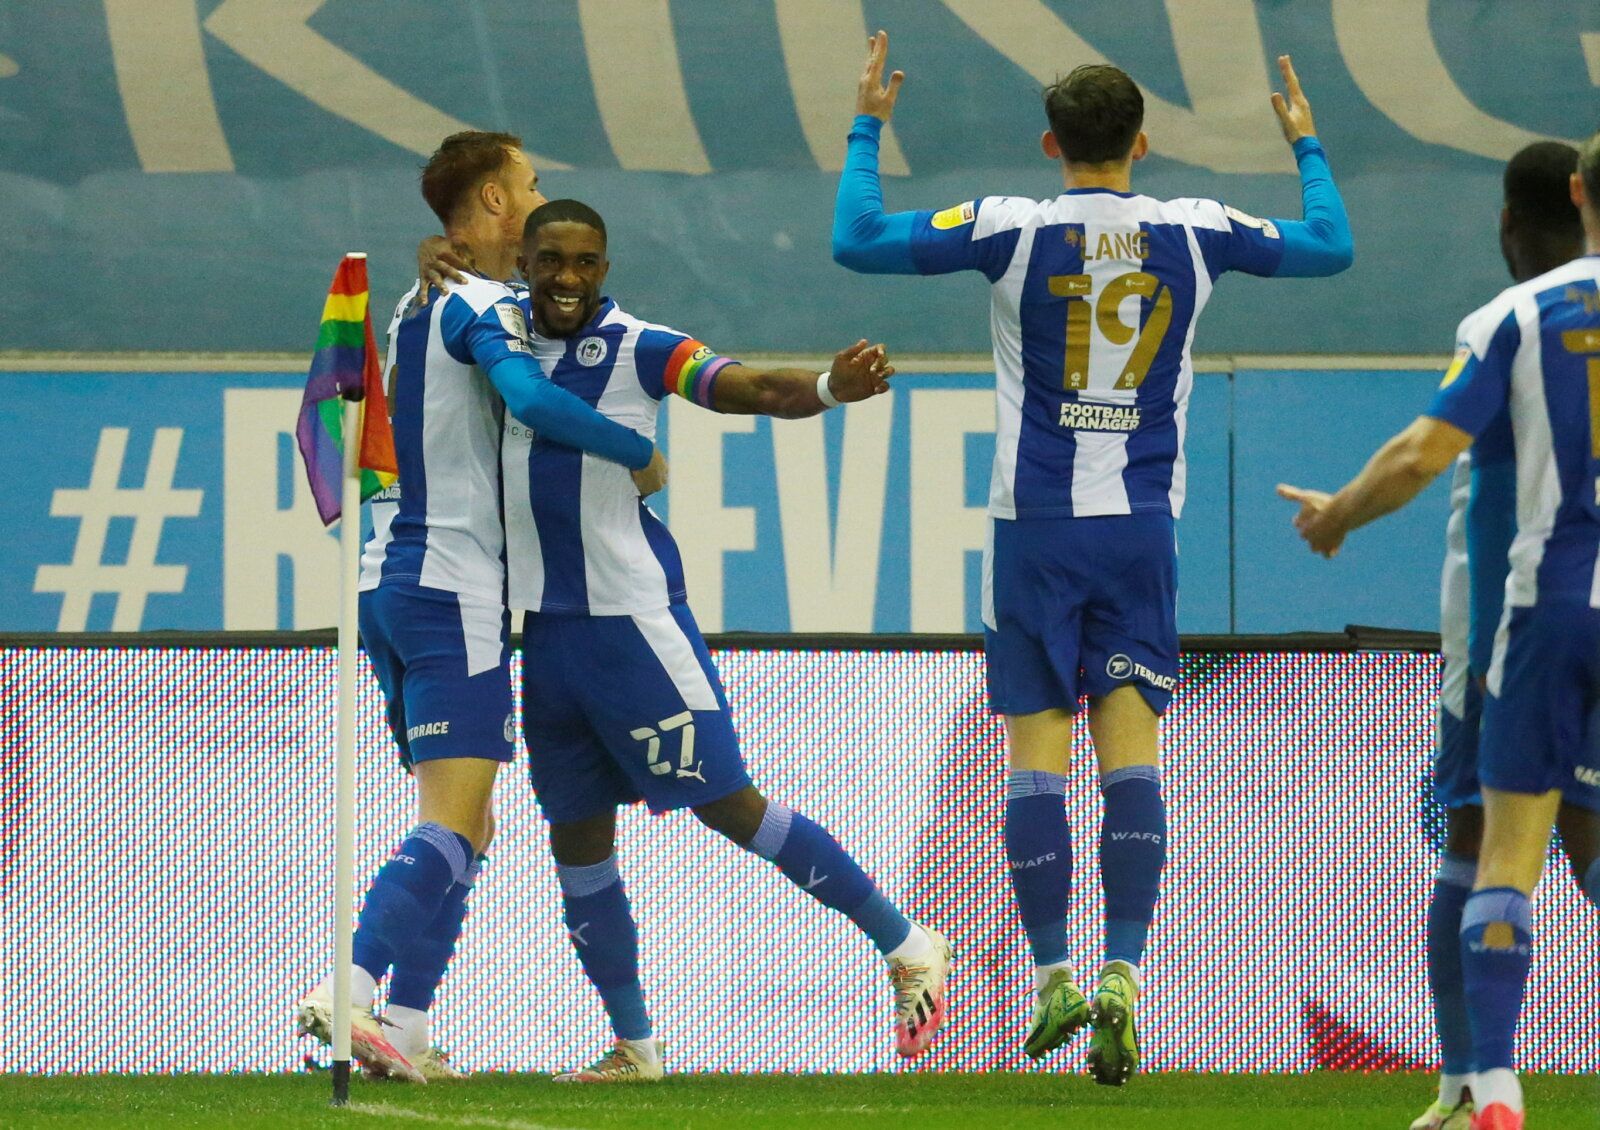 Soccer Football - League One - Wigan Athletic v Shrewsbury Town - DW Stadium, Wigan, Britain - December 8, 2021  Wigan Athletic's Tendayi Darikwa celebrates scoring their first goal with teammates    Action Images/Ed Sykes  EDITORIAL USE ONLY. No use with unauthorized audio, video, data, fixture lists, club/league logos or 